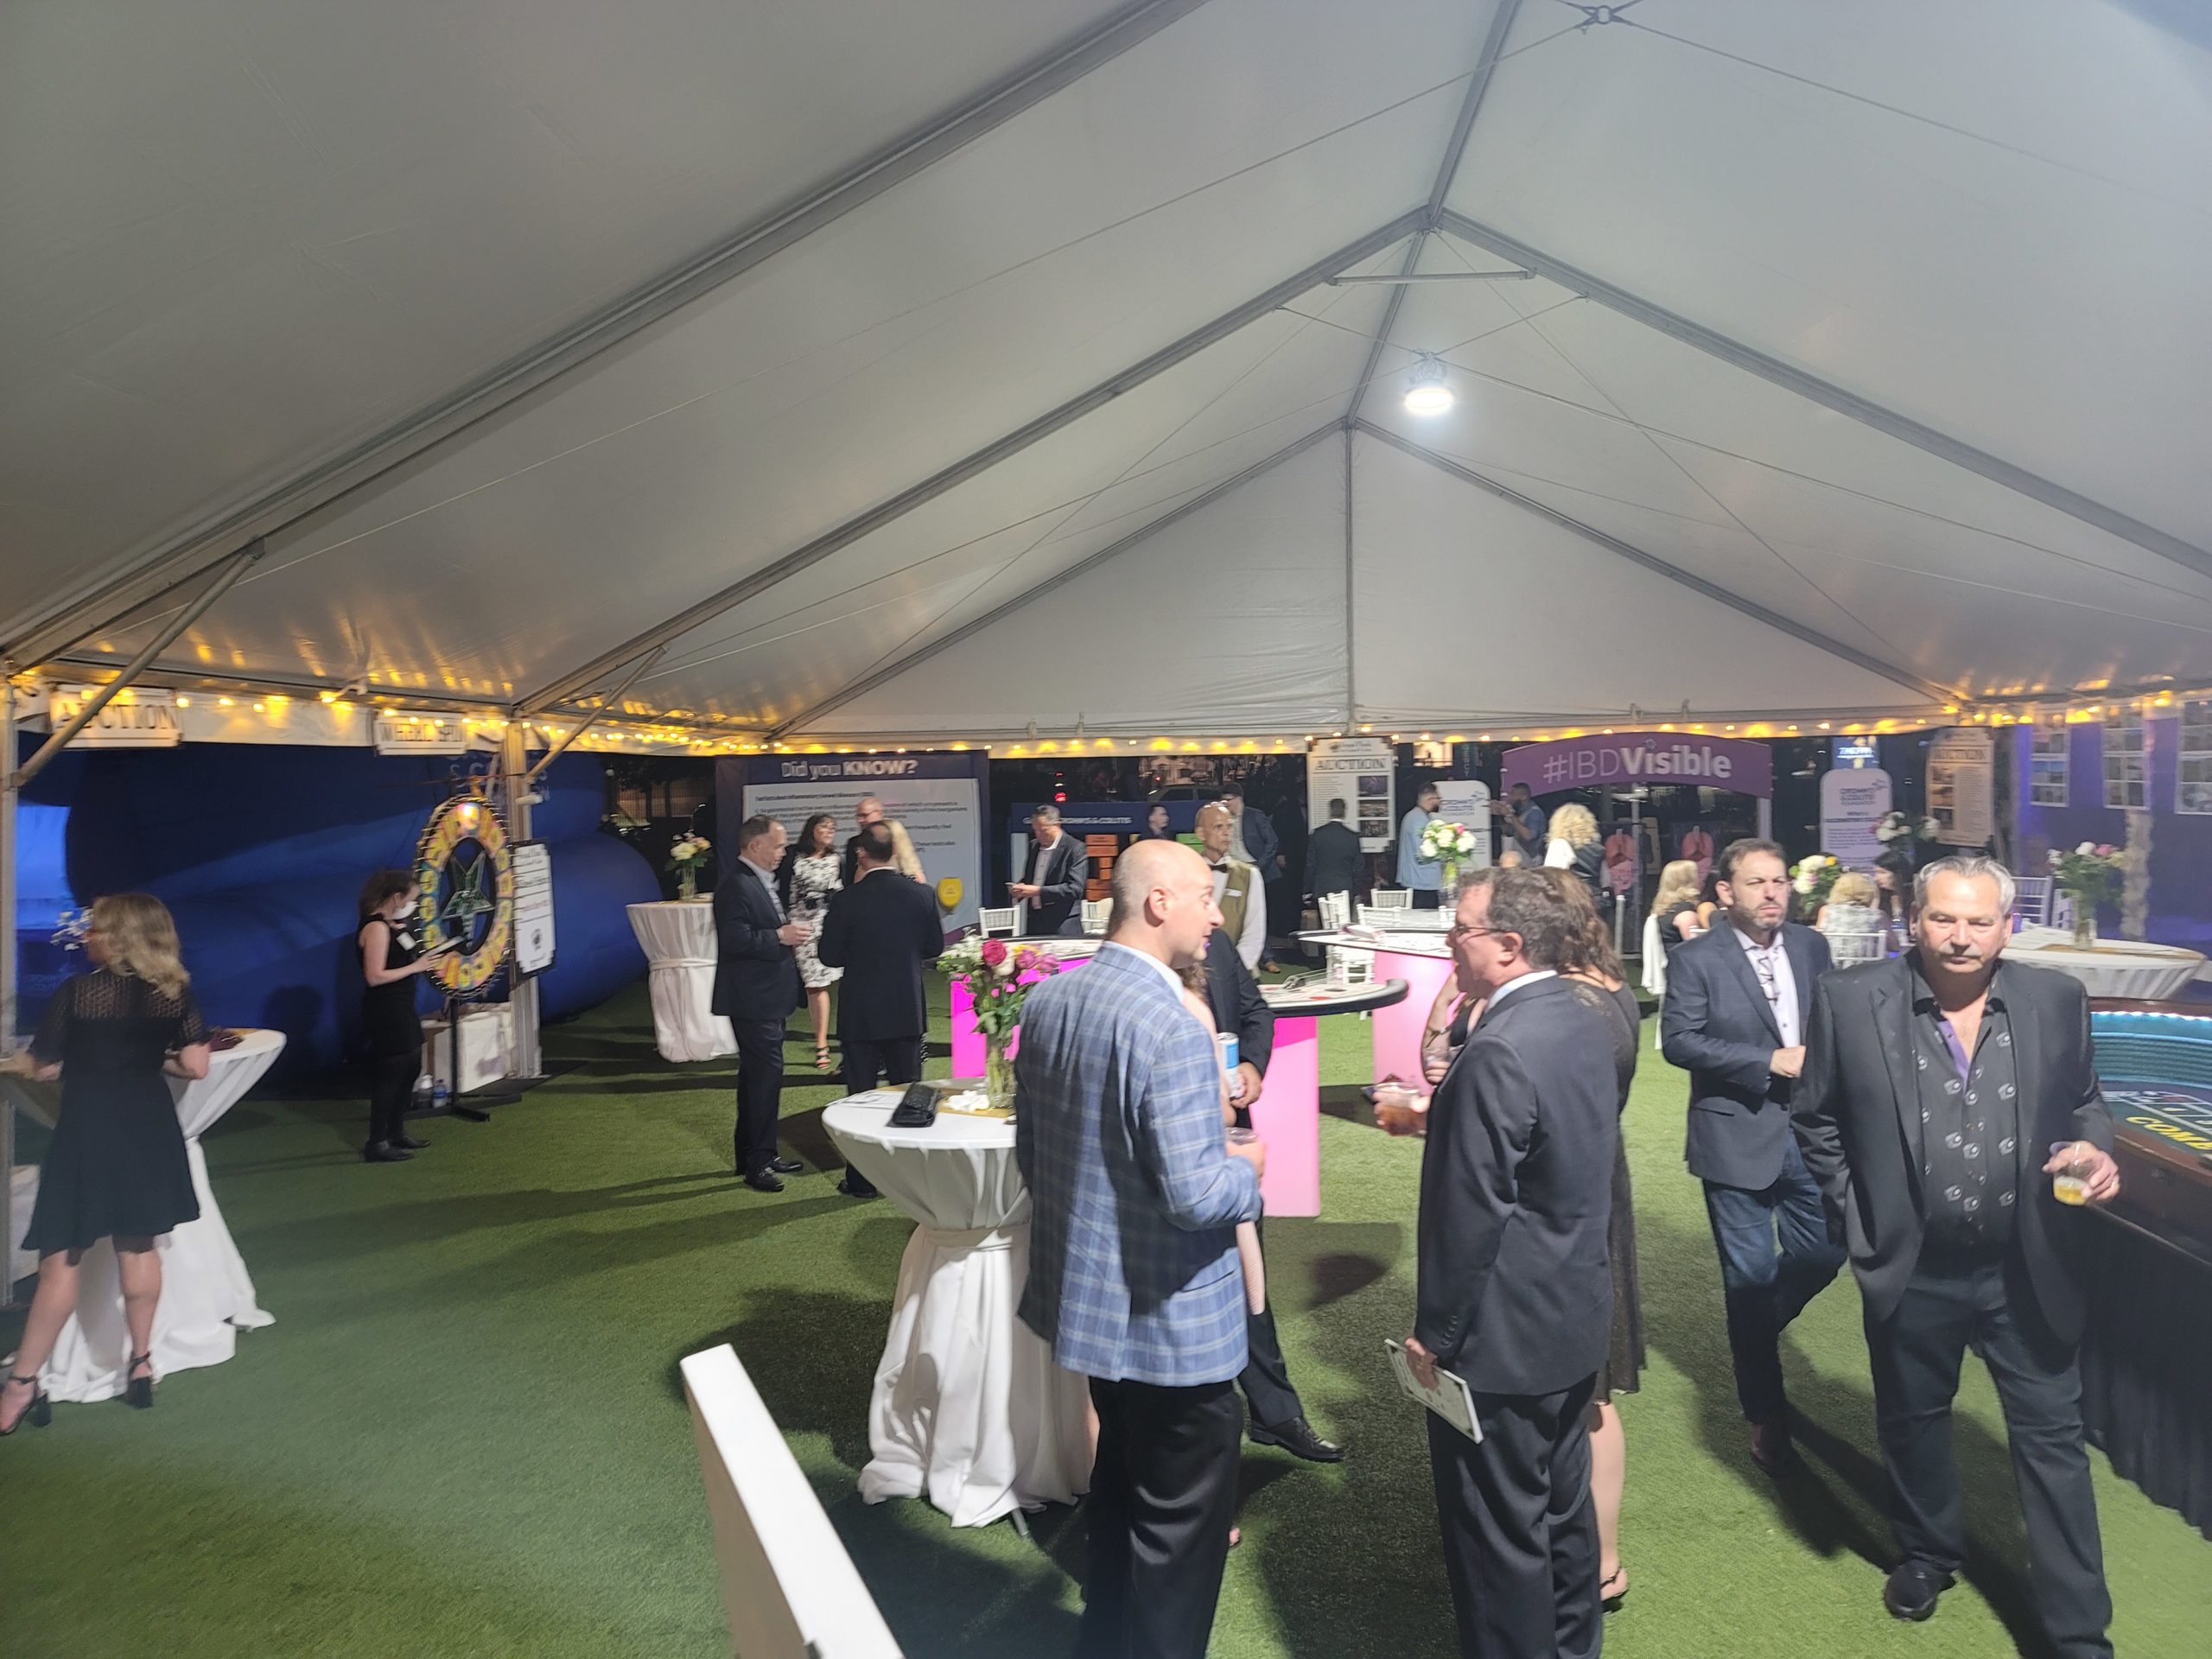 People gathered at Crohn's and Colitis exhibits under a white tent